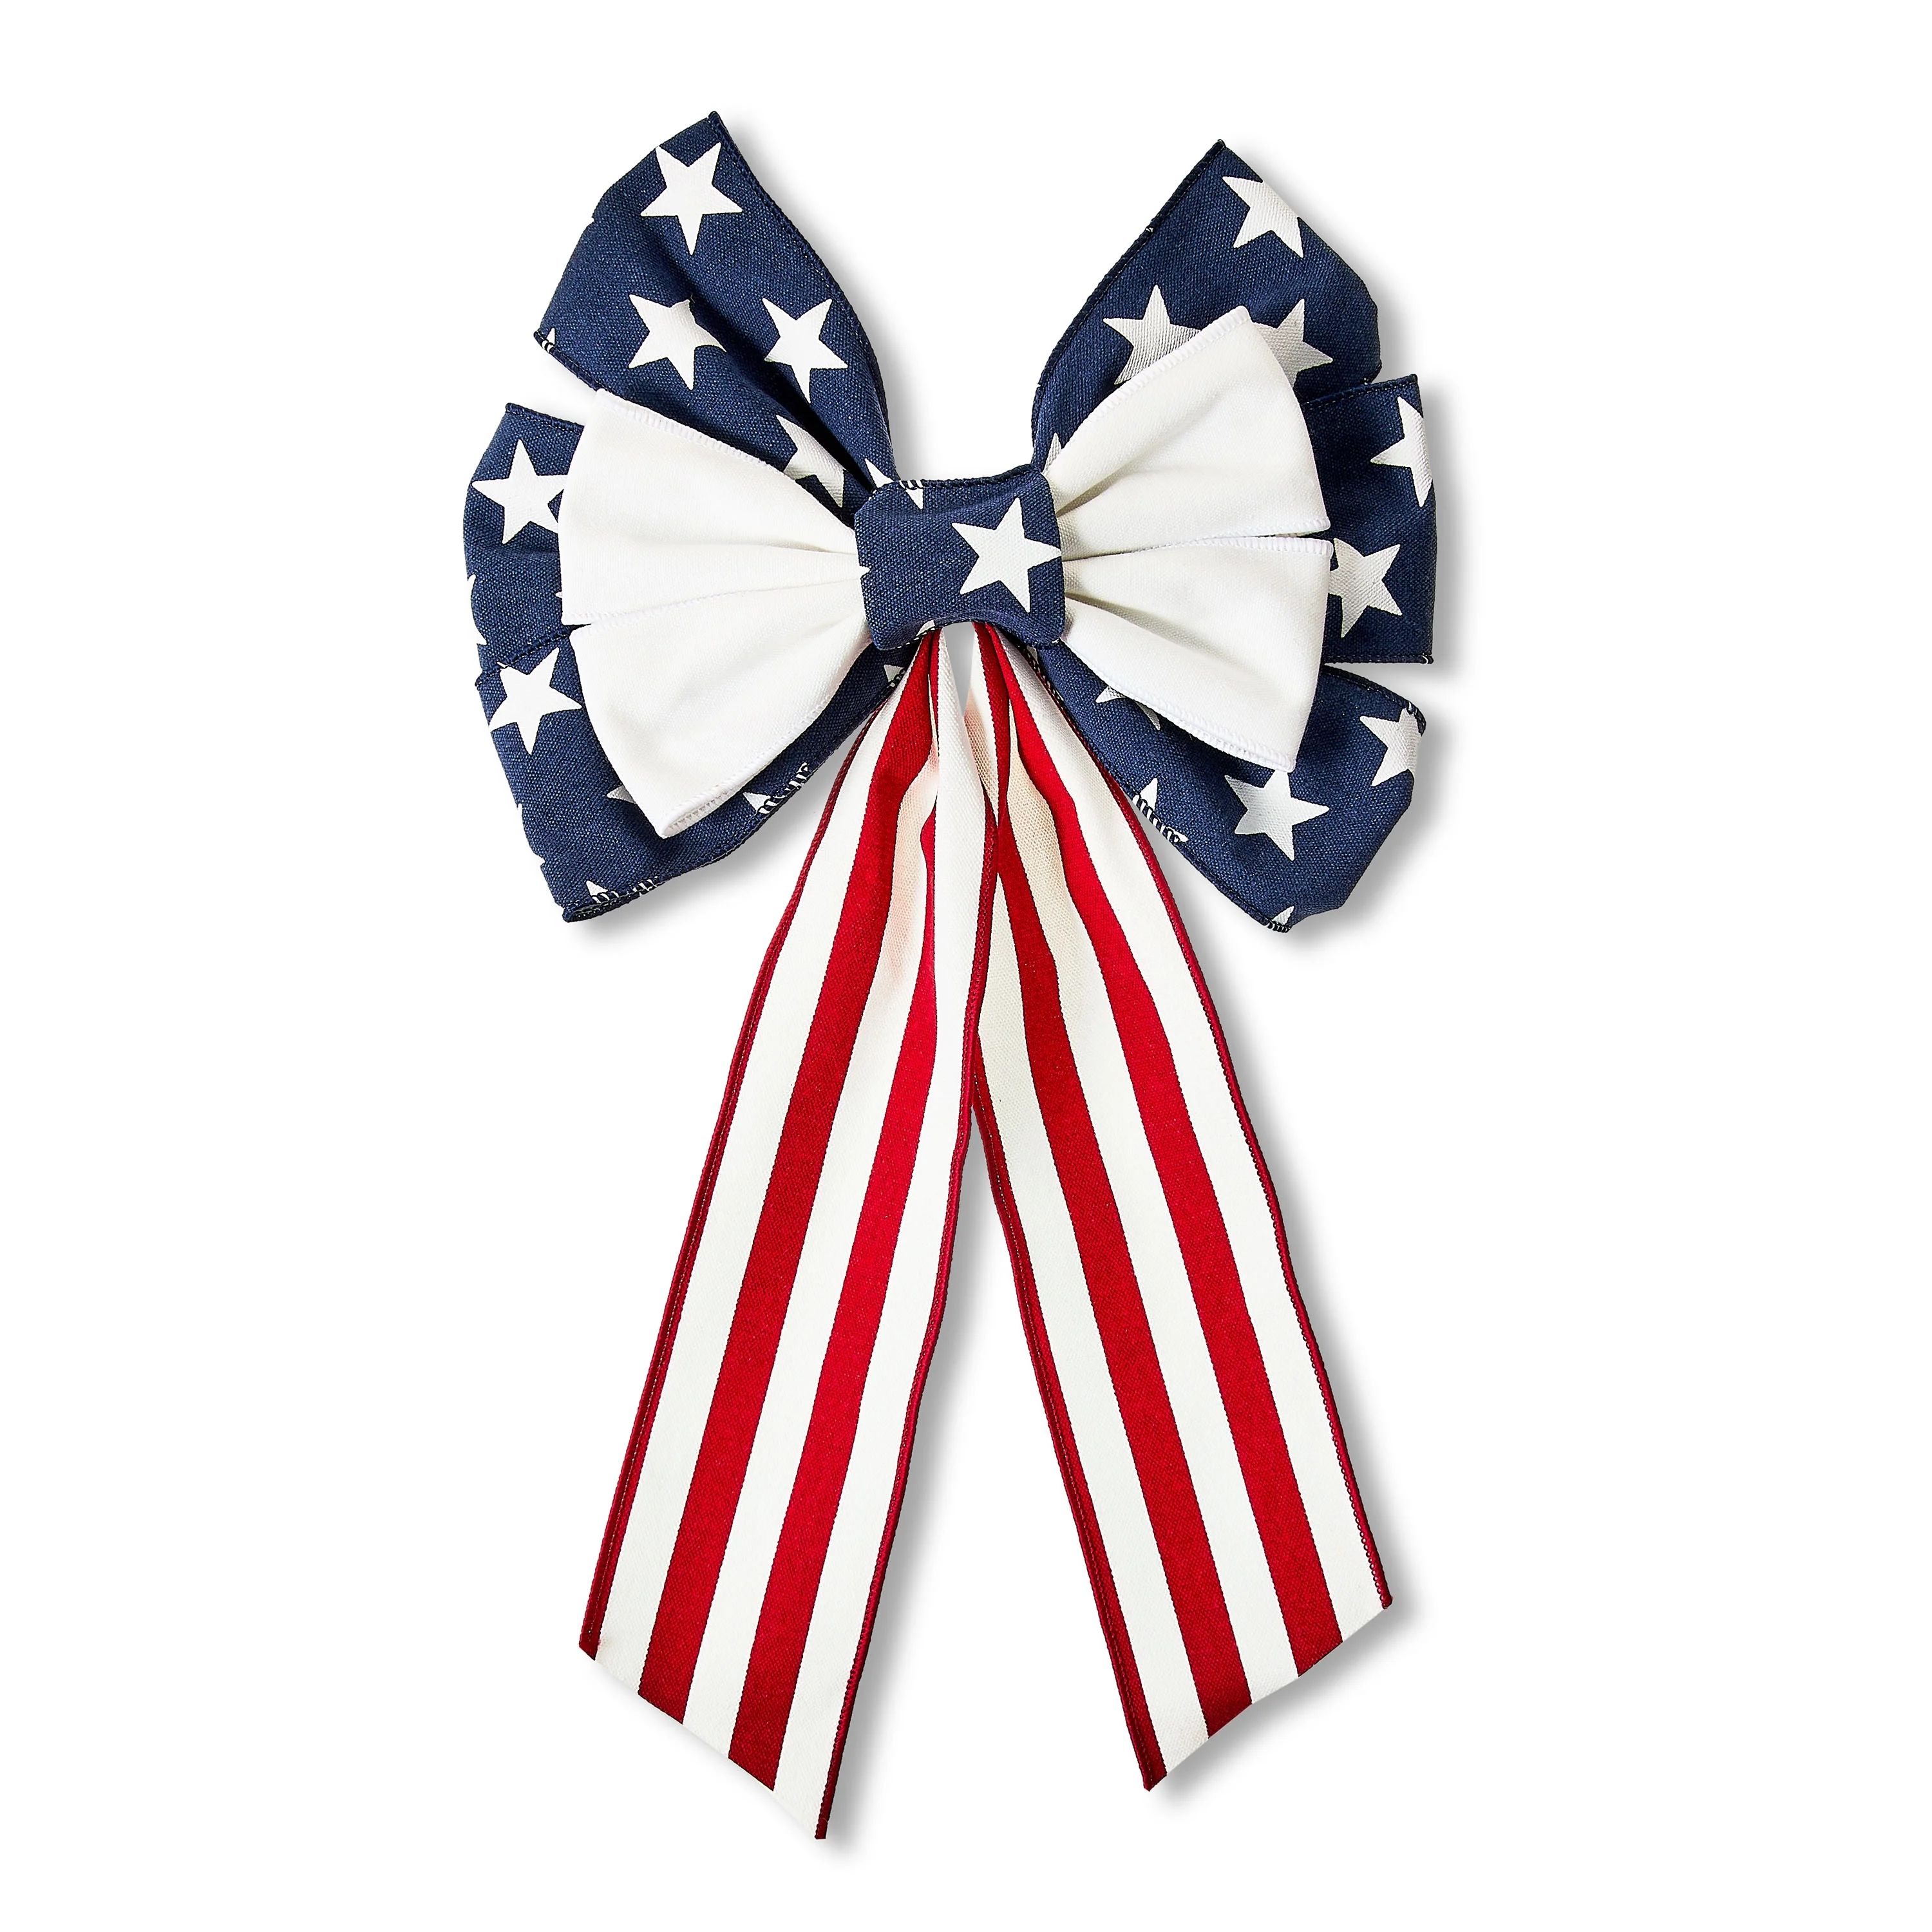 Patriotic Red, White & Blue Burlap Bow Decoration, 12", by Way To Celebrate | Walmart (US)